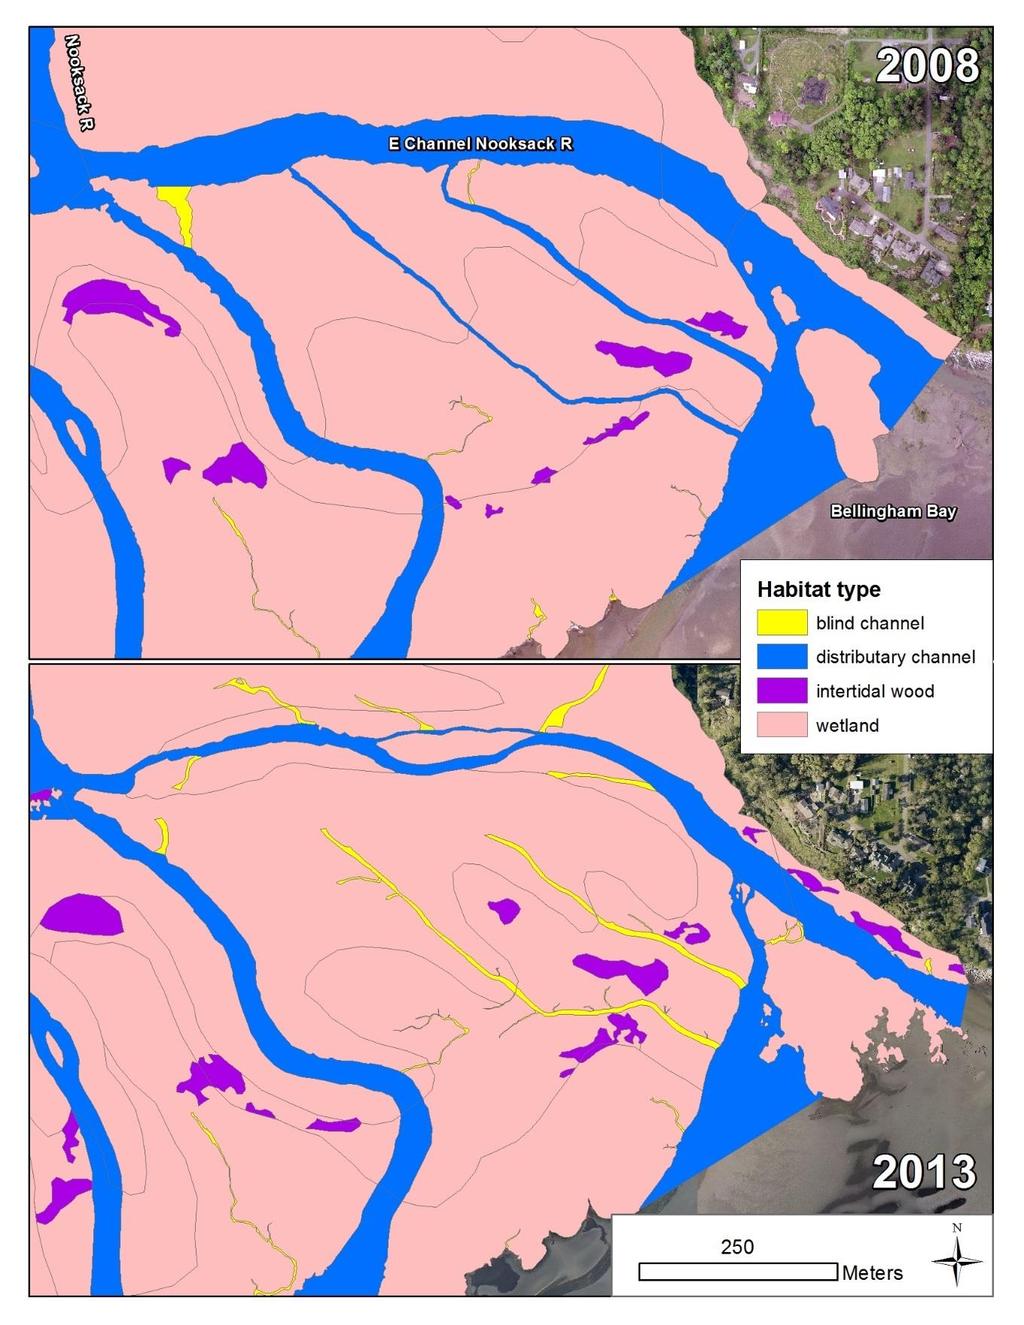 Figure 2.1.6. Detail showing habitat in the East Channel of the Nooksack River.